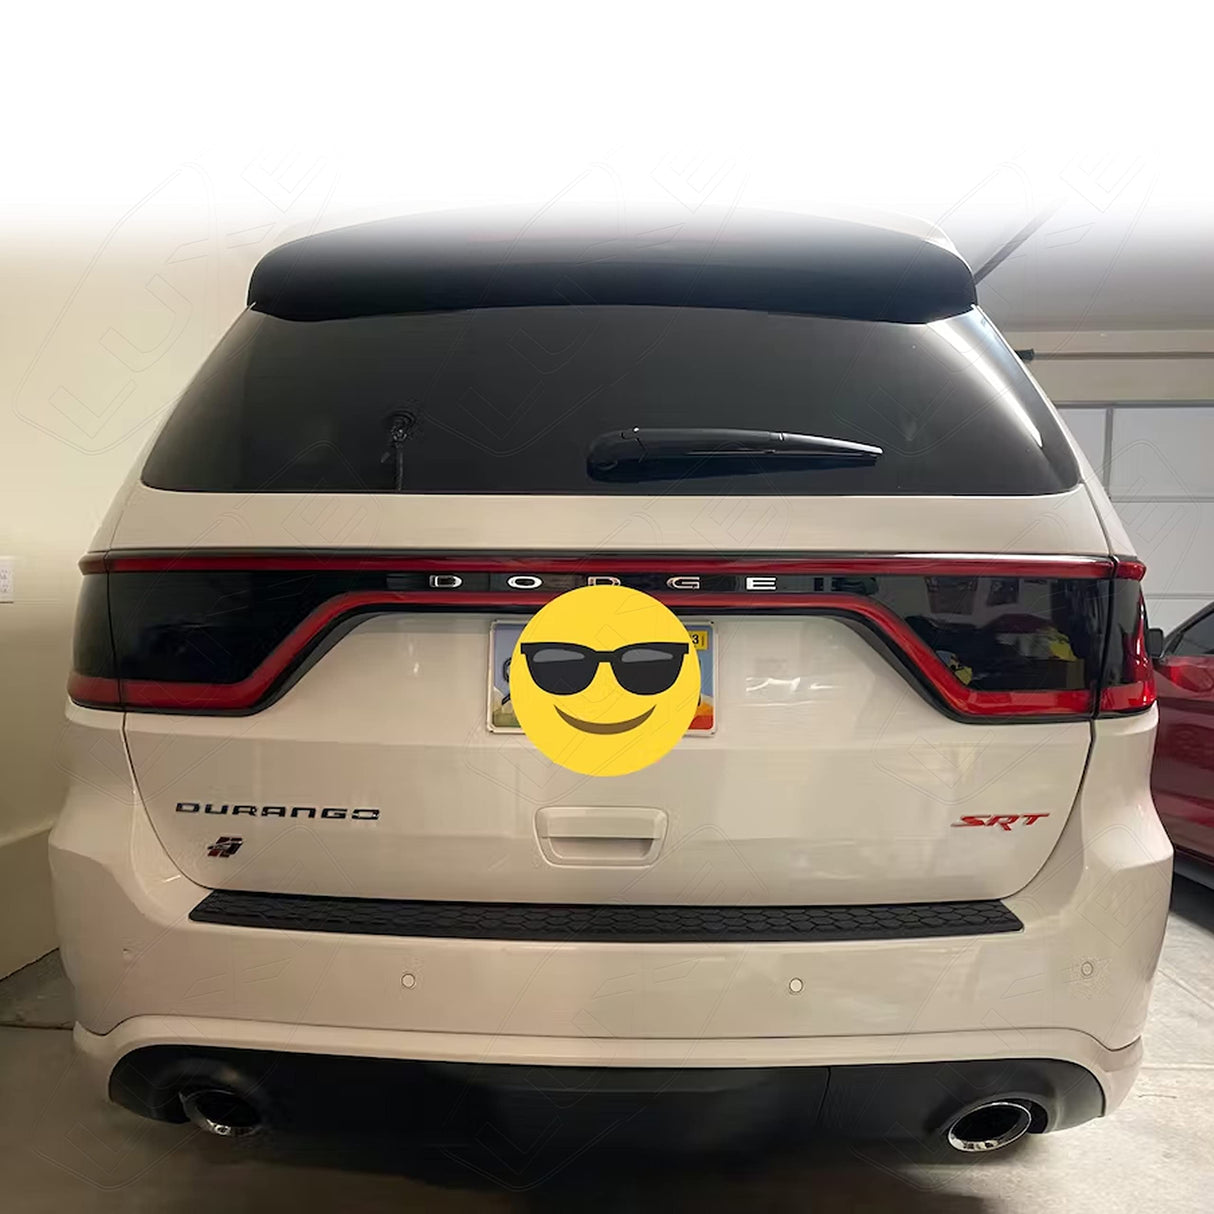 Luxe Auto Concepts Tail Light Tint Kit for 2014-22 Dodge Durango- Dark Smoke Gloss | Exact Cut Vinyl Overlays | Tinted Dry Application Luxe LightWrap Film with Air Release Technology